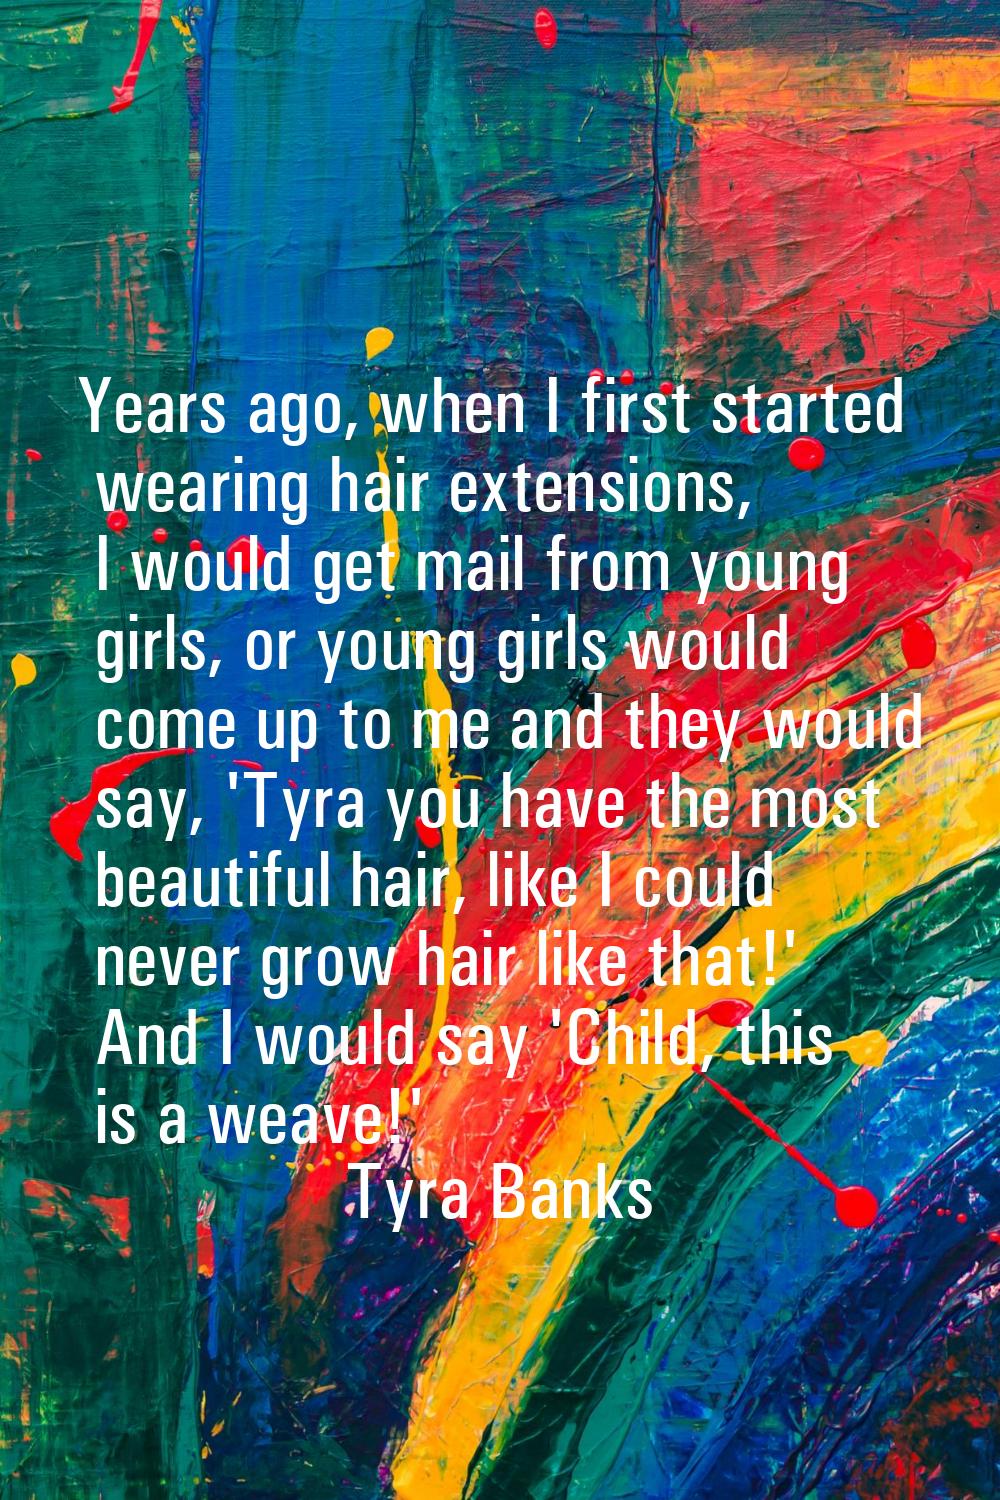 Years ago, when I first started wearing hair extensions, I would get mail from young girls, or youn